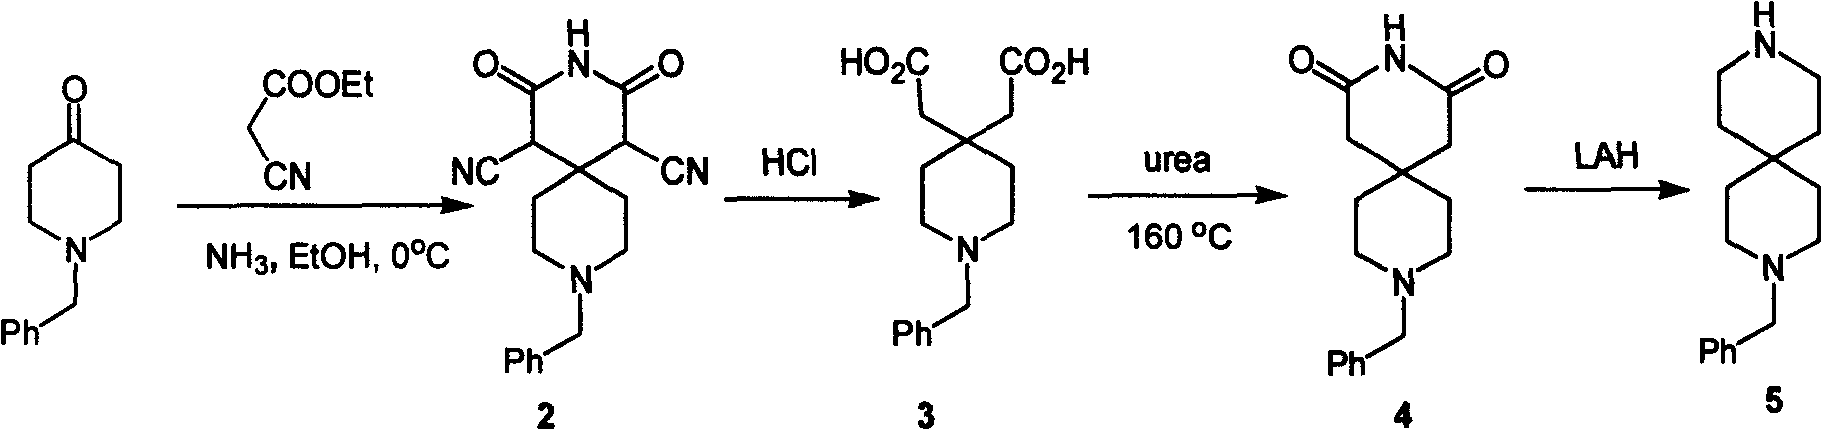 Method for synthesizing 3,9-diaza spiro[5.5] undecane template compounds